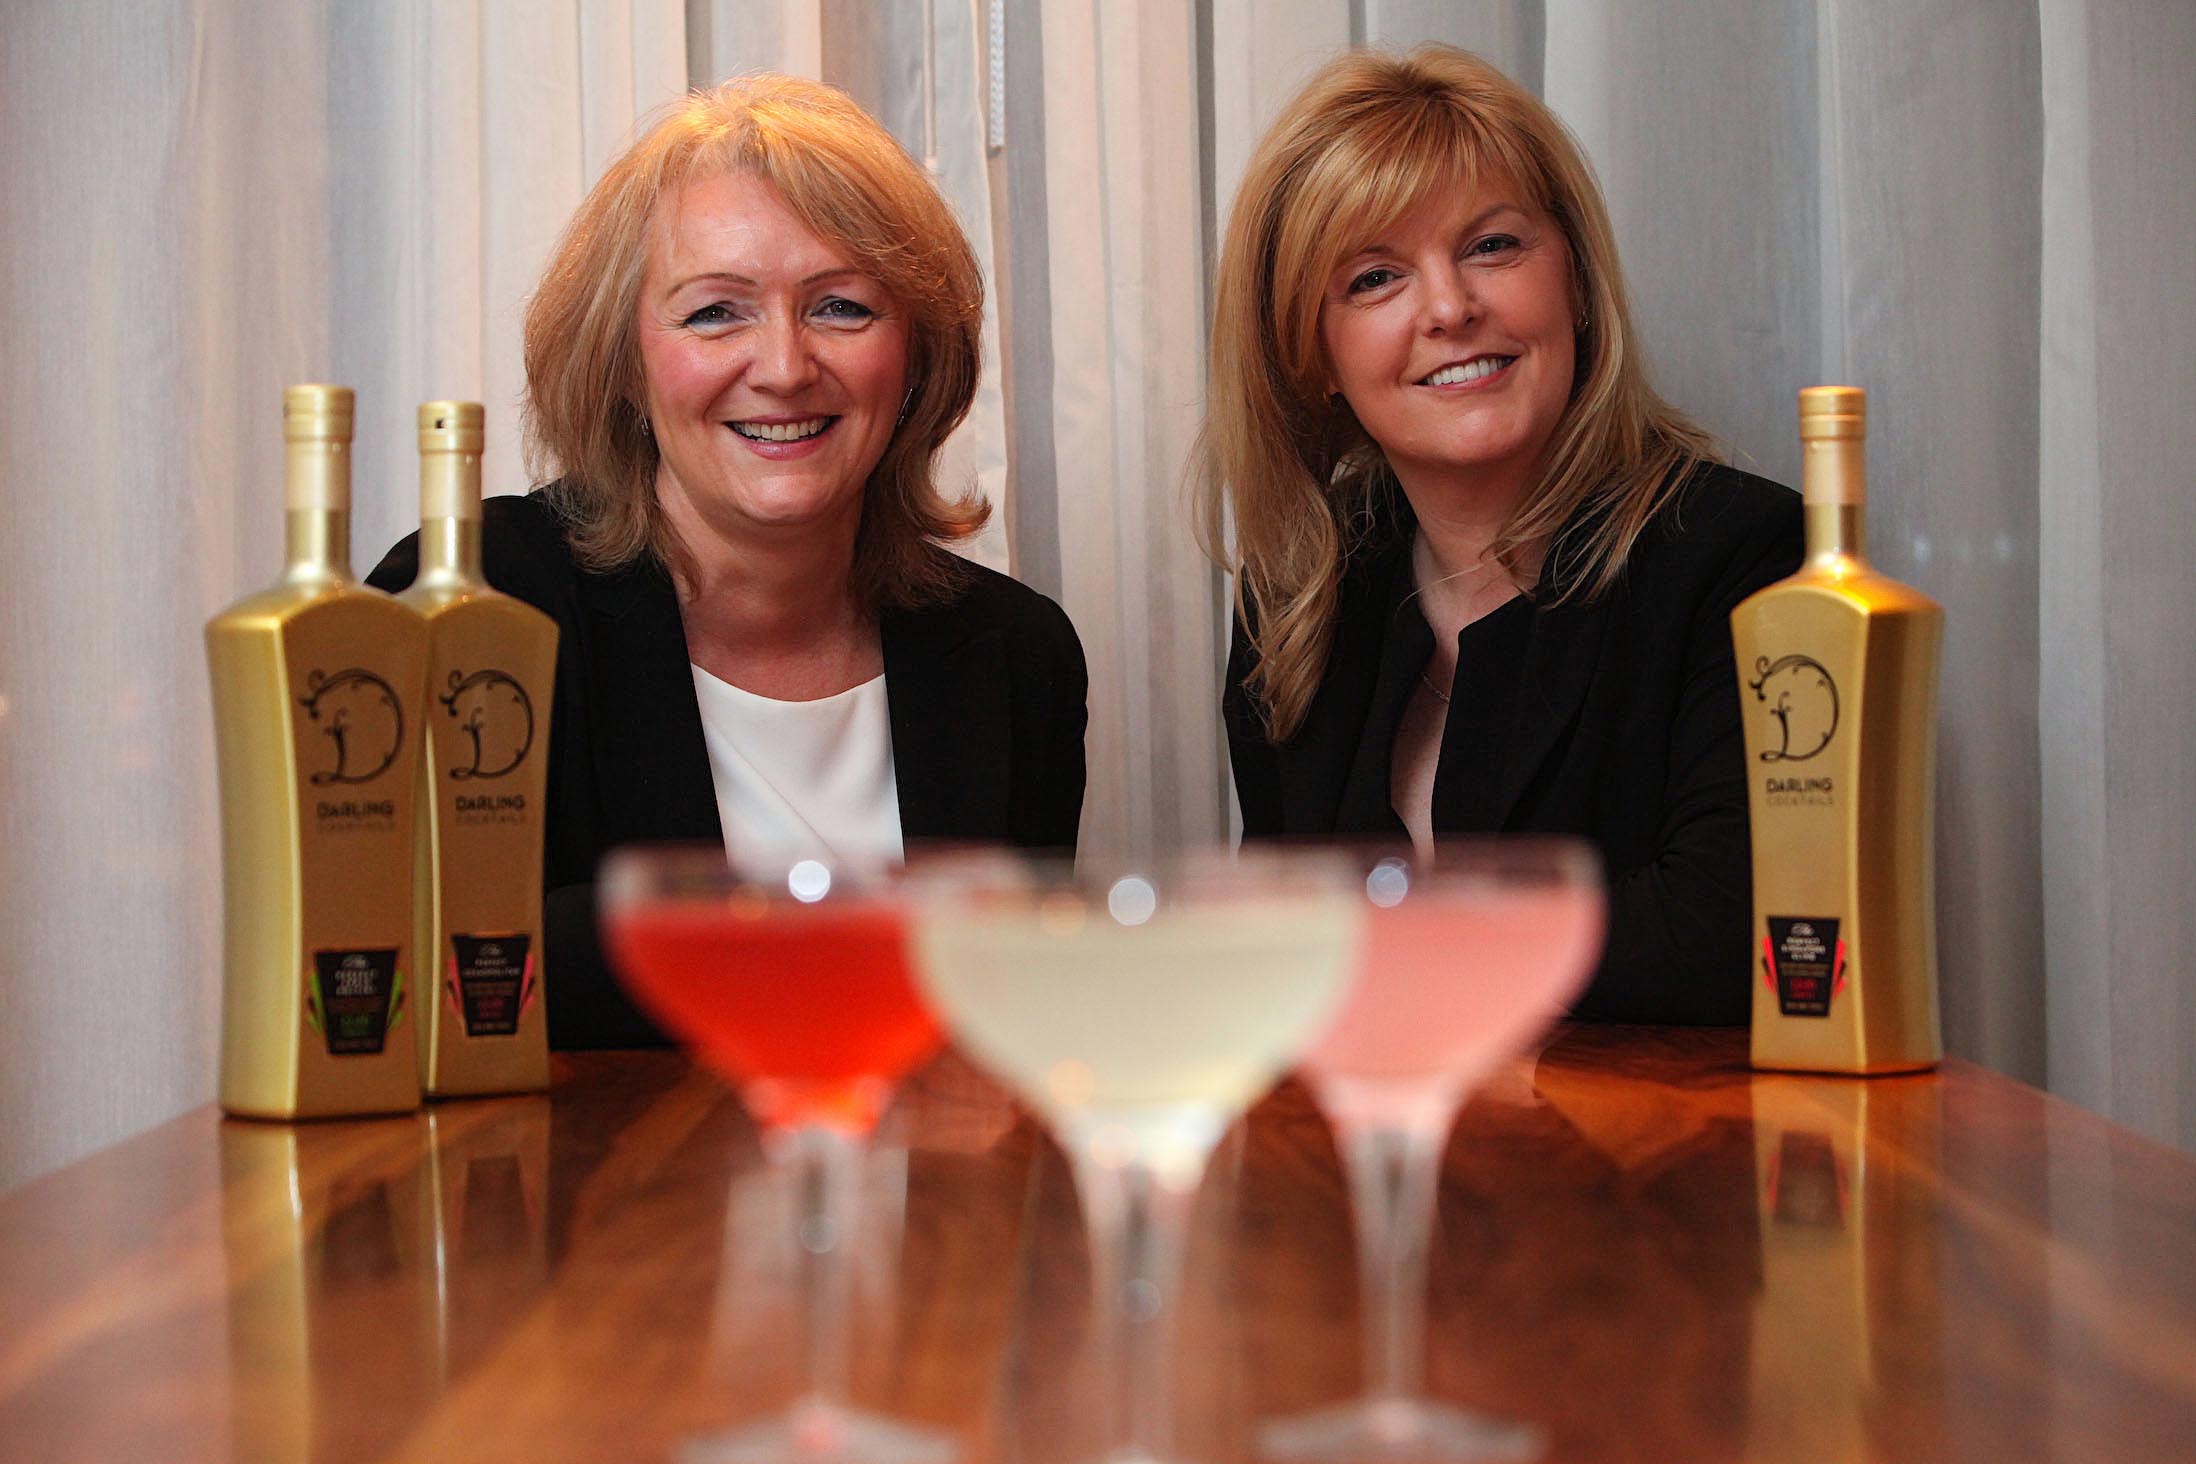 Ann Donnelly and Elizabeth Iannelli of Darling Cocktails